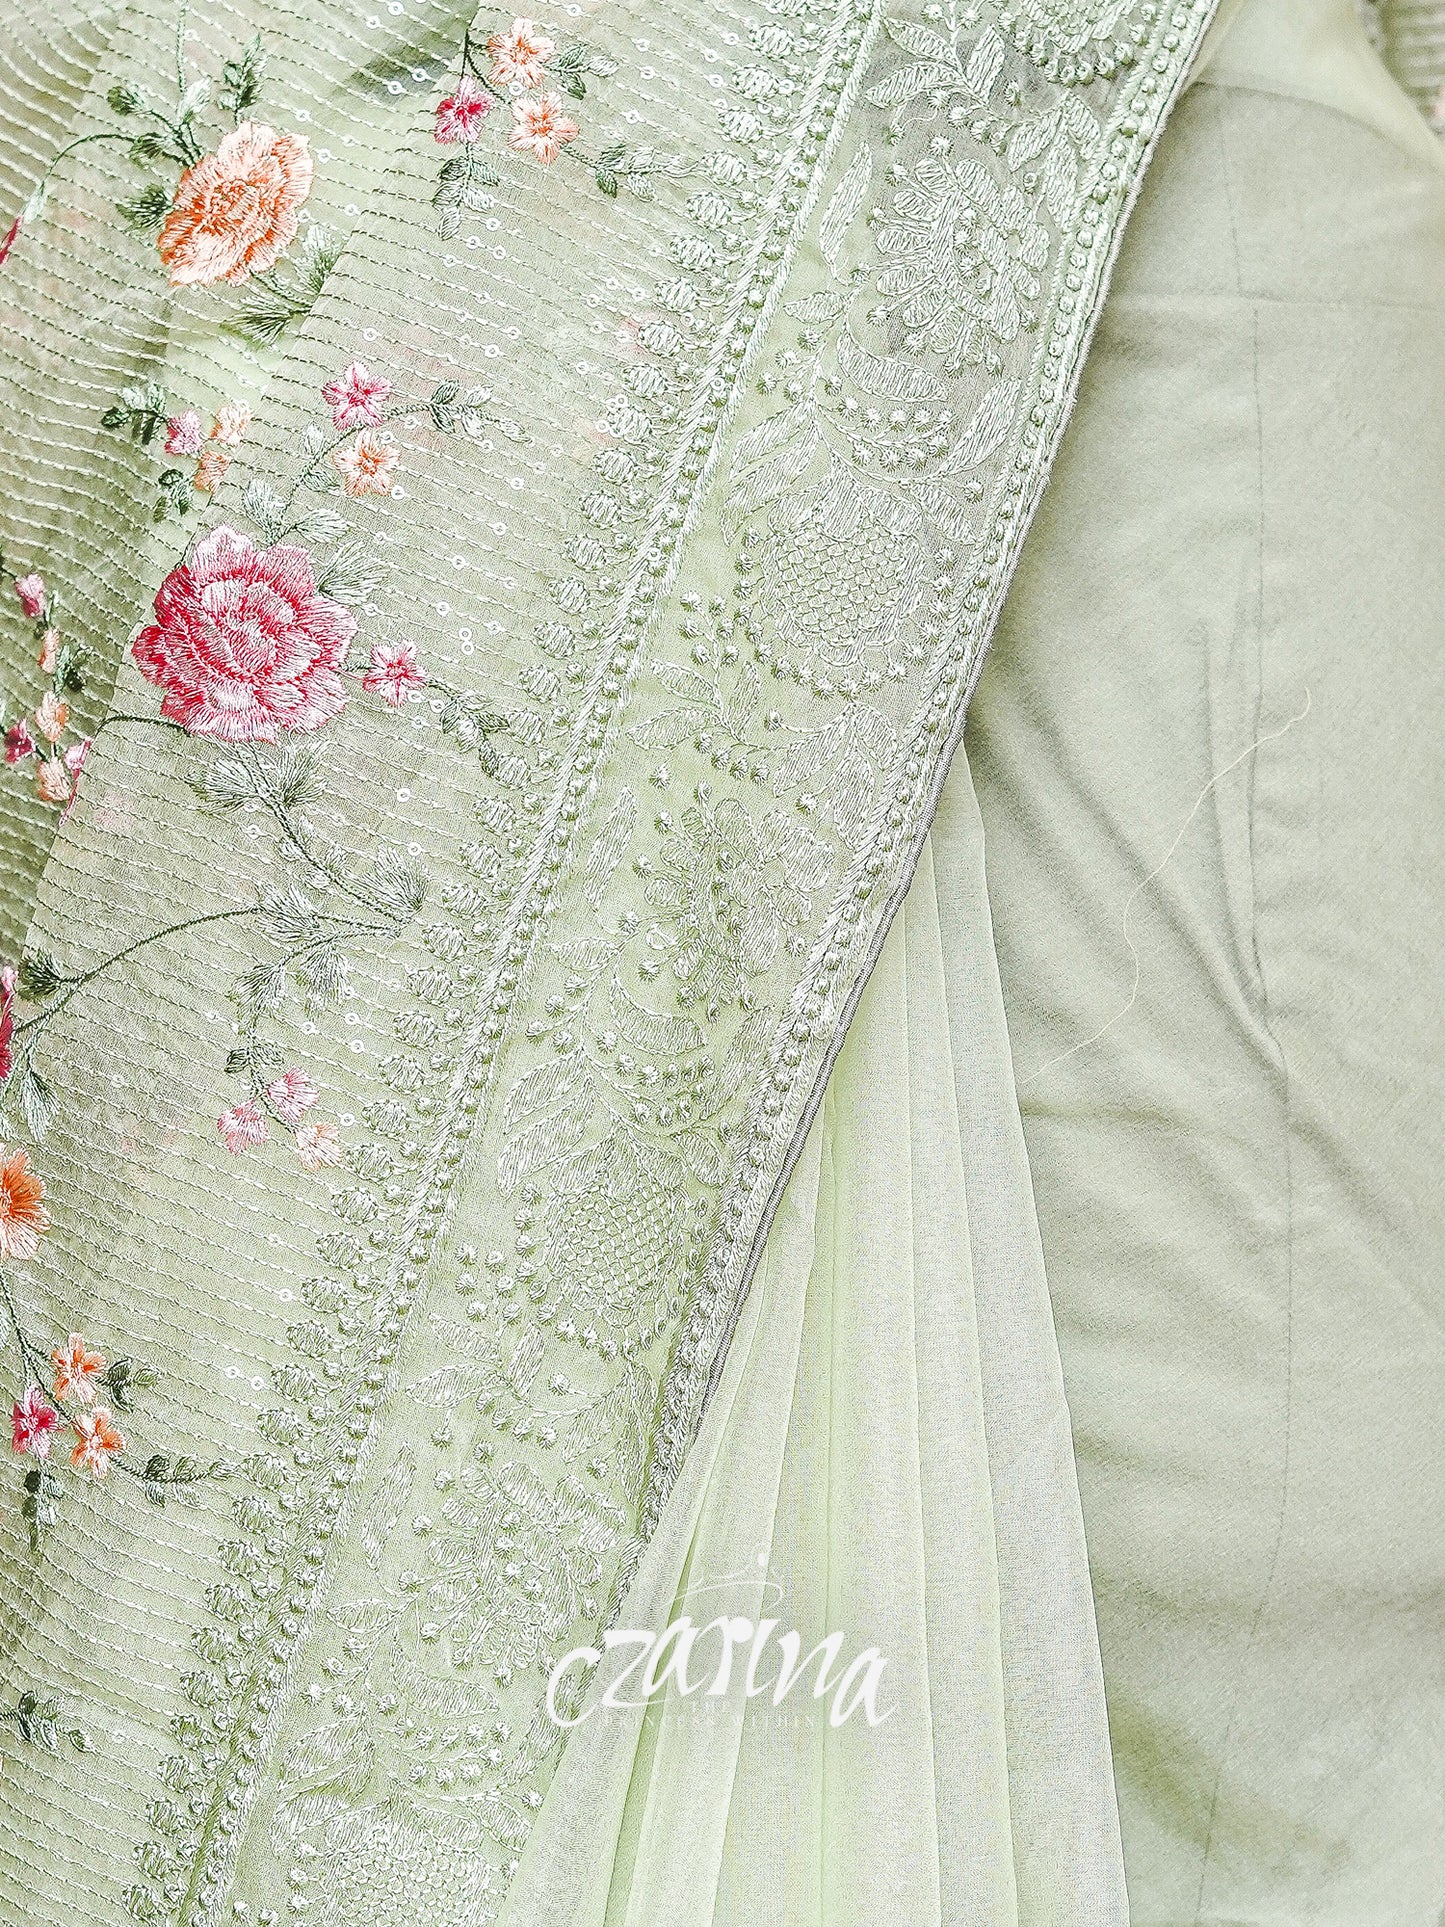 PISTA GREEN WITH FLORAL EMBROIDERY ORGANZA SILK SAREE